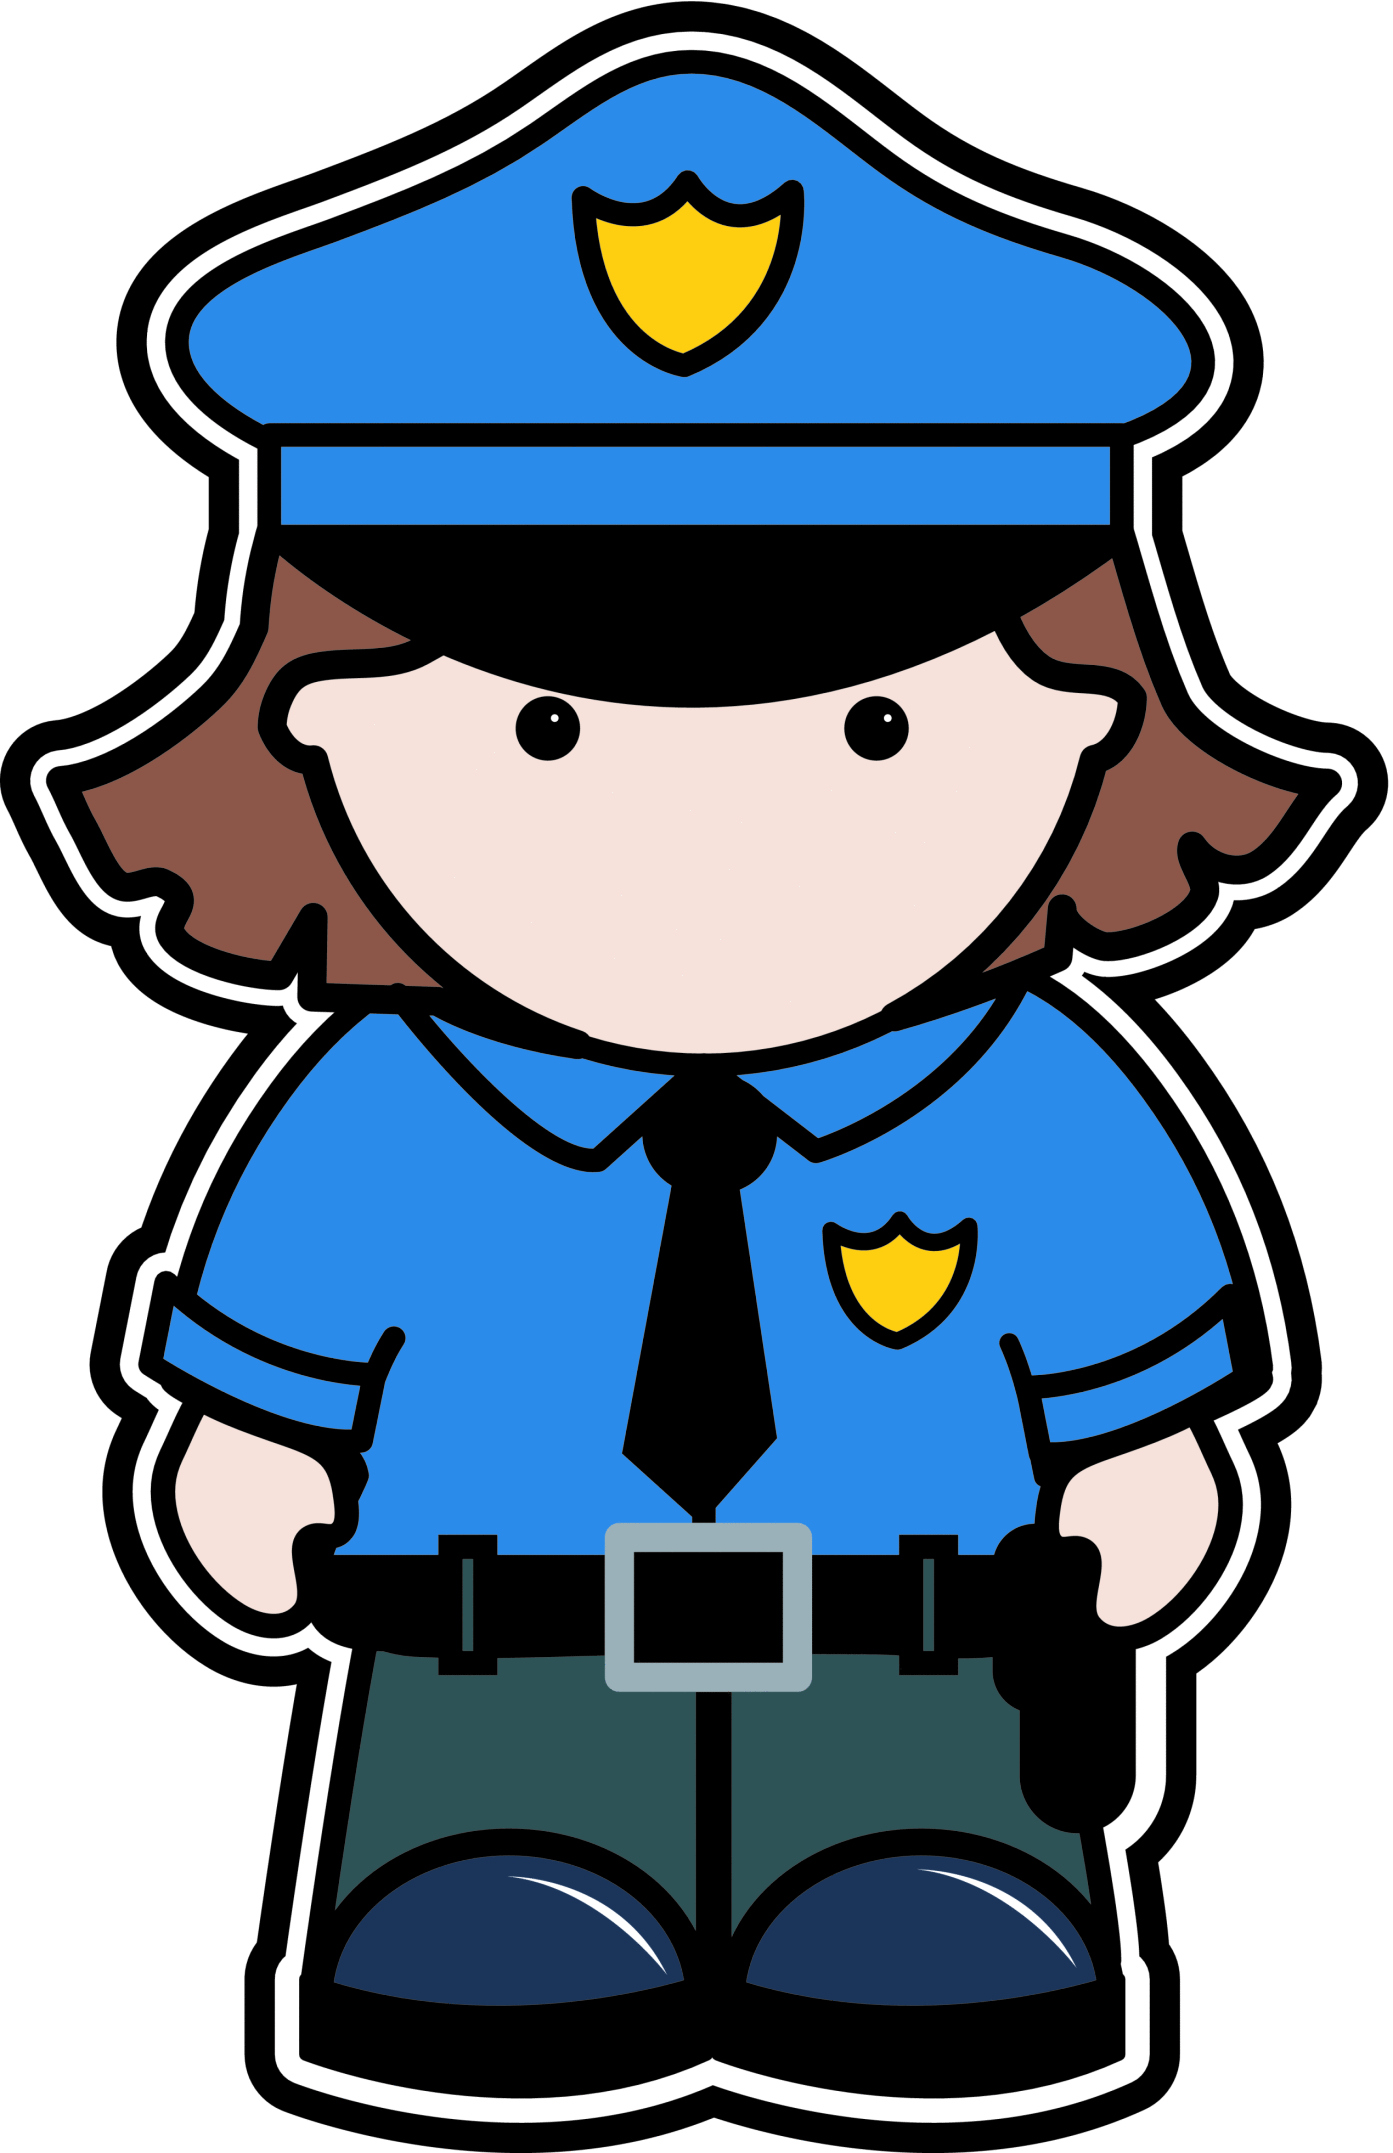 Police Officer Wallpaper Clipart Panda Free Clipart Images